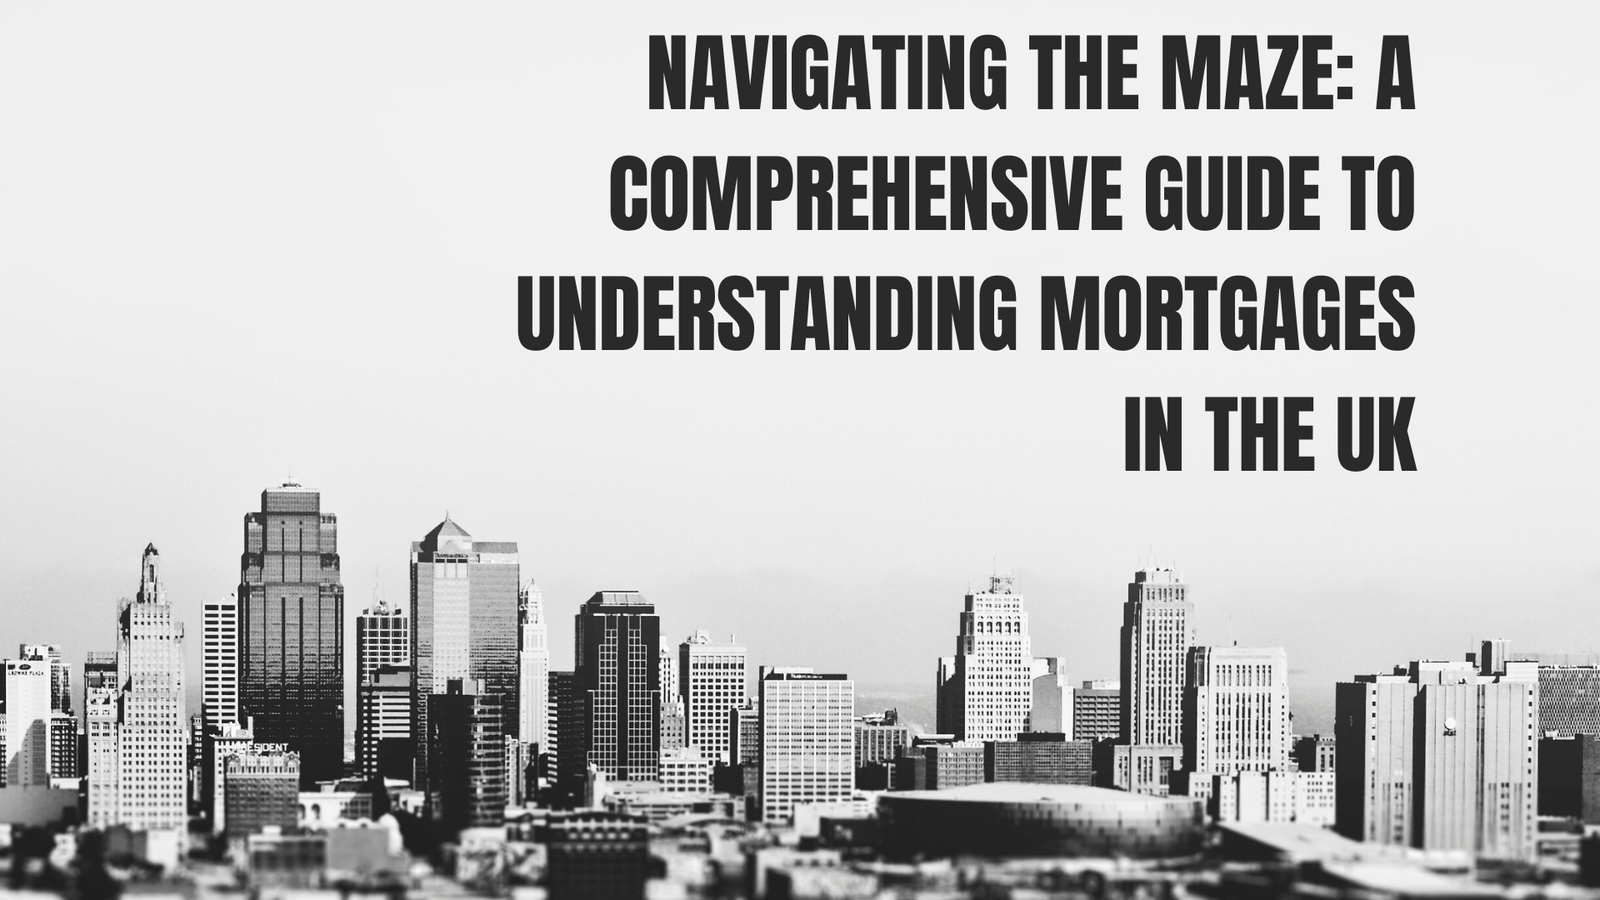 Navigating the Maze: A Comprehensive Guide to Understanding Mortgages in the UK